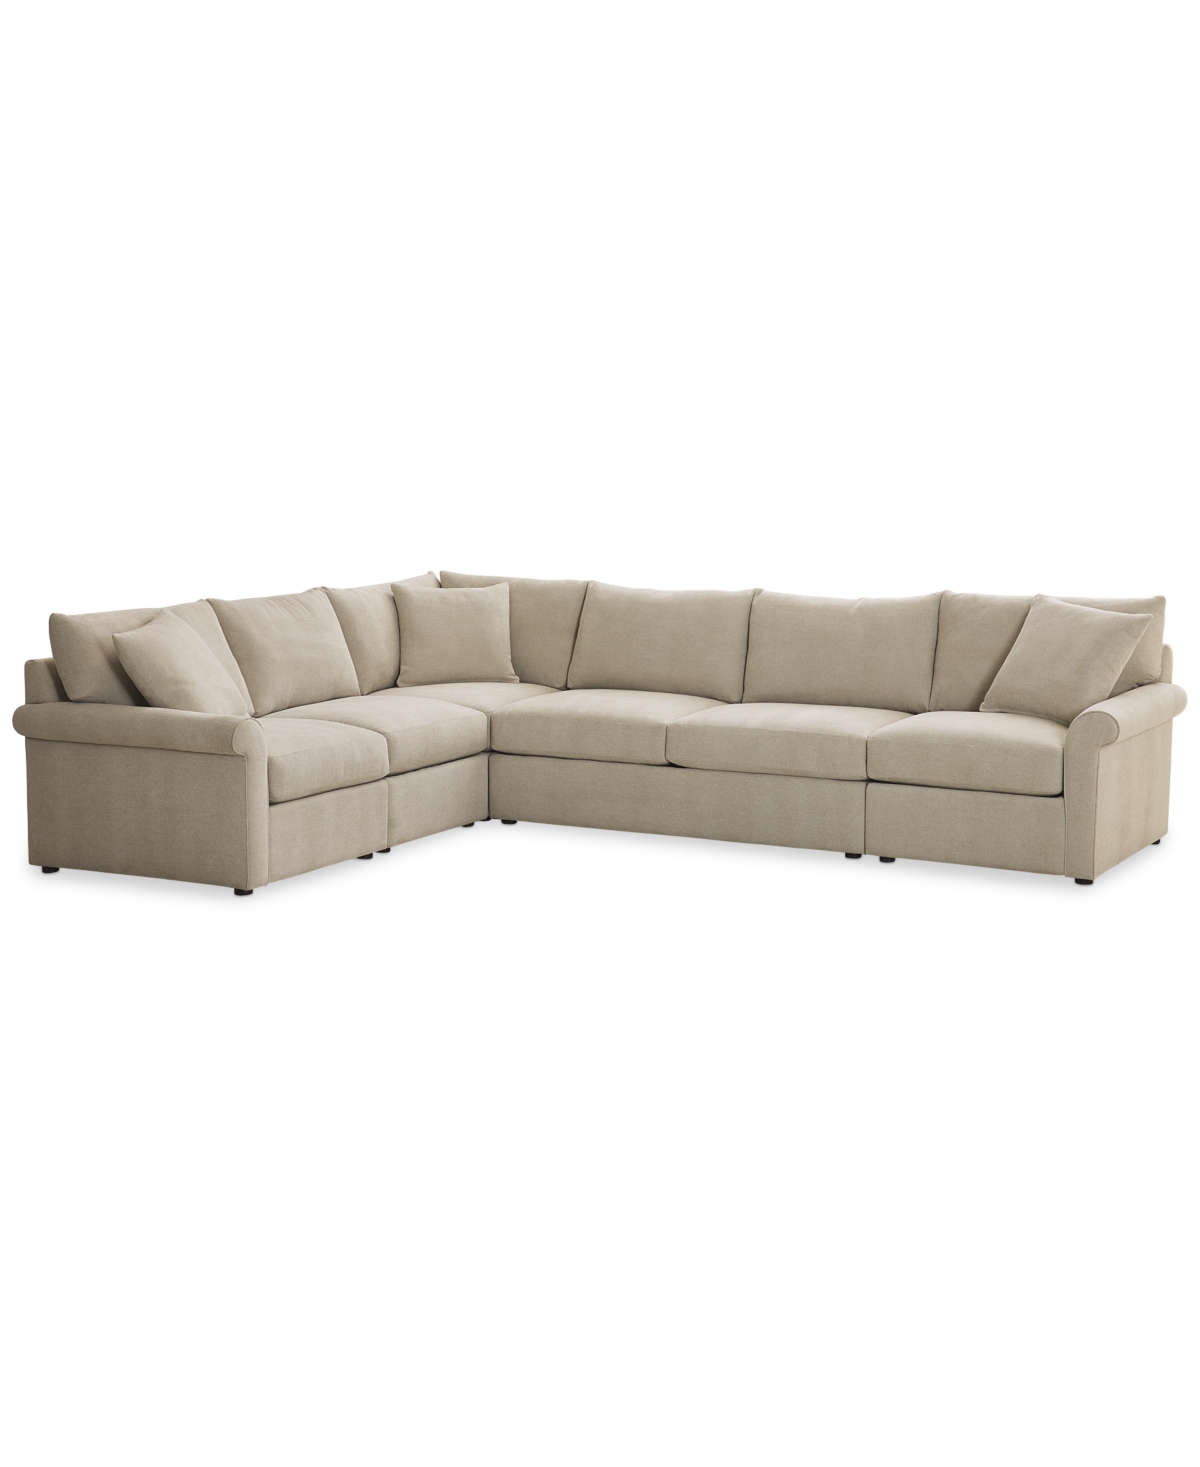 Furniture Wrenley 137" 5-pc. Fabric L-shape Modular Sectional Sofa, Created For Macy's In Dove